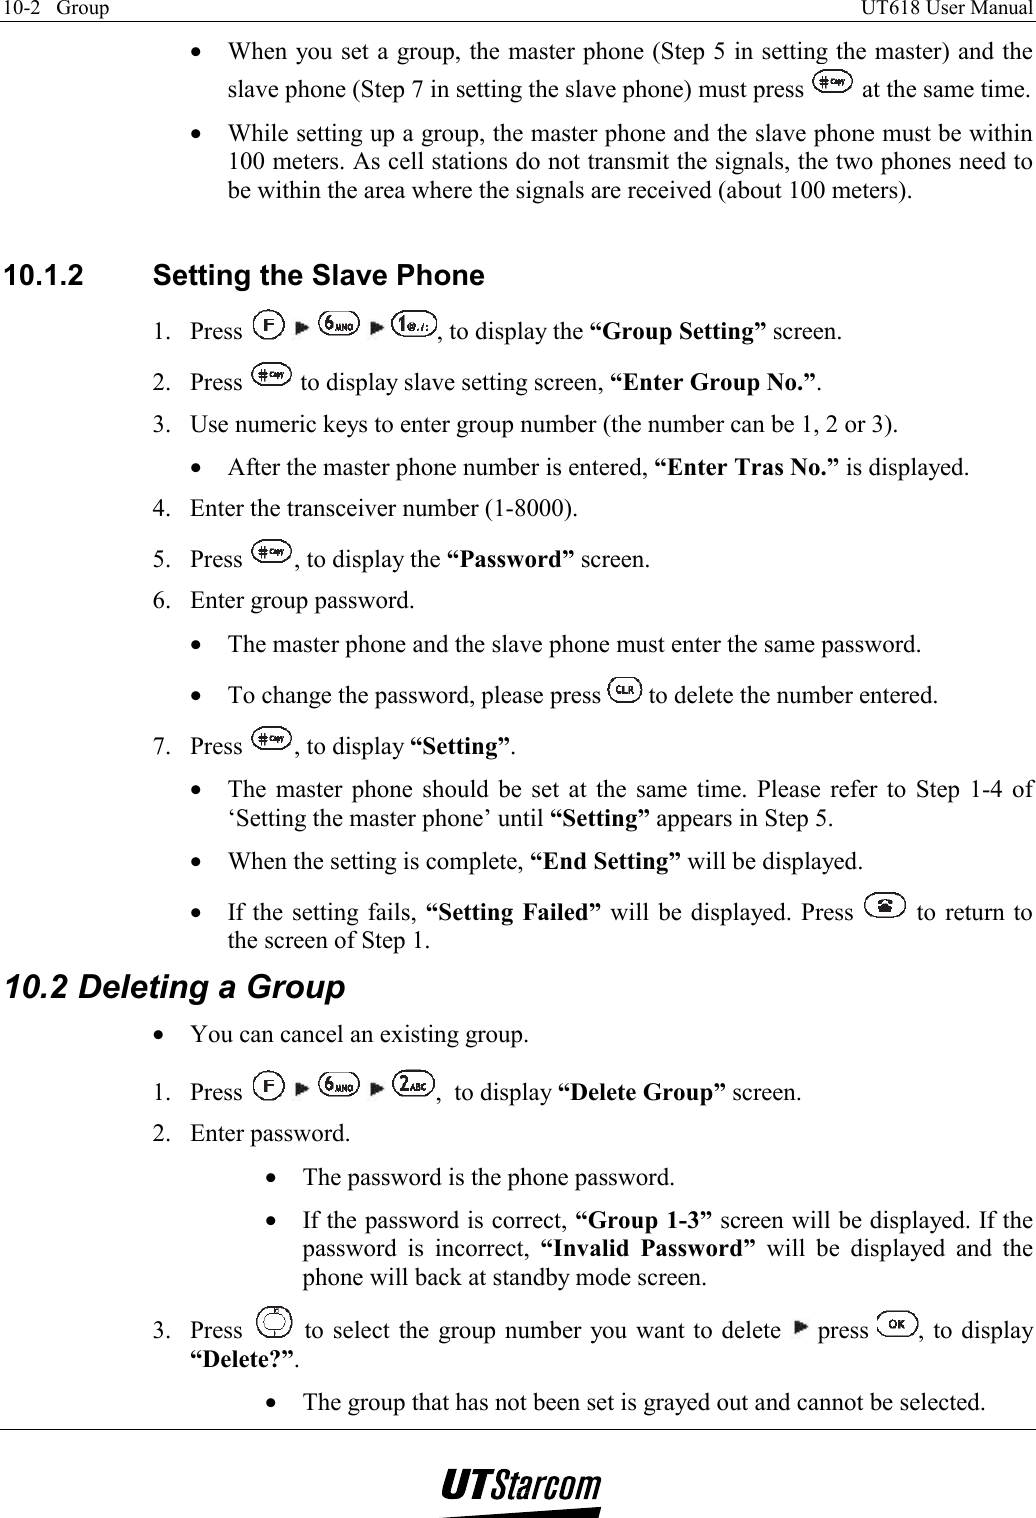 10-2   Group    UT618 User Manual   •  When you set a group, the master phone (Step 5 in setting the master) and the slave phone (Step 7 in setting the slave phone) must press   at the same time. •  While setting up a group, the master phone and the slave phone must be within 100 meters. As cell stations do not transmit the signals, the two phones need to be within the area where the signals are received (about 100 meters).  10.1.2  Setting the Slave Phone 1. Press          , to display the “Group Setting” screen. 2. Press   to display slave setting screen, “Enter Group No.”. 3.  Use numeric keys to enter group number (the number can be 1, 2 or 3). •  After the master phone number is entered, “Enter Tras No.” is displayed. 4.  Enter the transceiver number (1-8000). 5. Press  , to display the “Password” screen. 6.  Enter group password. •  The master phone and the slave phone must enter the same password. •  To change the password, please press   to delete the number entered. 7. Press  , to display “Setting”. •  The master phone should be set at the same time. Please refer to Step 1-4 of ‘Setting the master phone’ until “Setting” appears in Step 5. •  When the setting is complete, “End Setting” will be displayed. •  If the setting fails, “Setting Failed” will be displayed. Press   to return to the screen of Step 1. 10.2 Deleting a Group •  You can cancel an existing group. 1. Press          ,  to display “Delete Group” screen. 2. Enter password. •  The password is the phone password. •  If the password is correct, “Group 1-3” screen will be displayed. If the password is incorrect, “Invalid Password” will be displayed and the phone will back at standby mode screen. 3. Press   to select the group number you want to delete   press  , to display “Delete?”. •  The group that has not been set is grayed out and cannot be selected. 